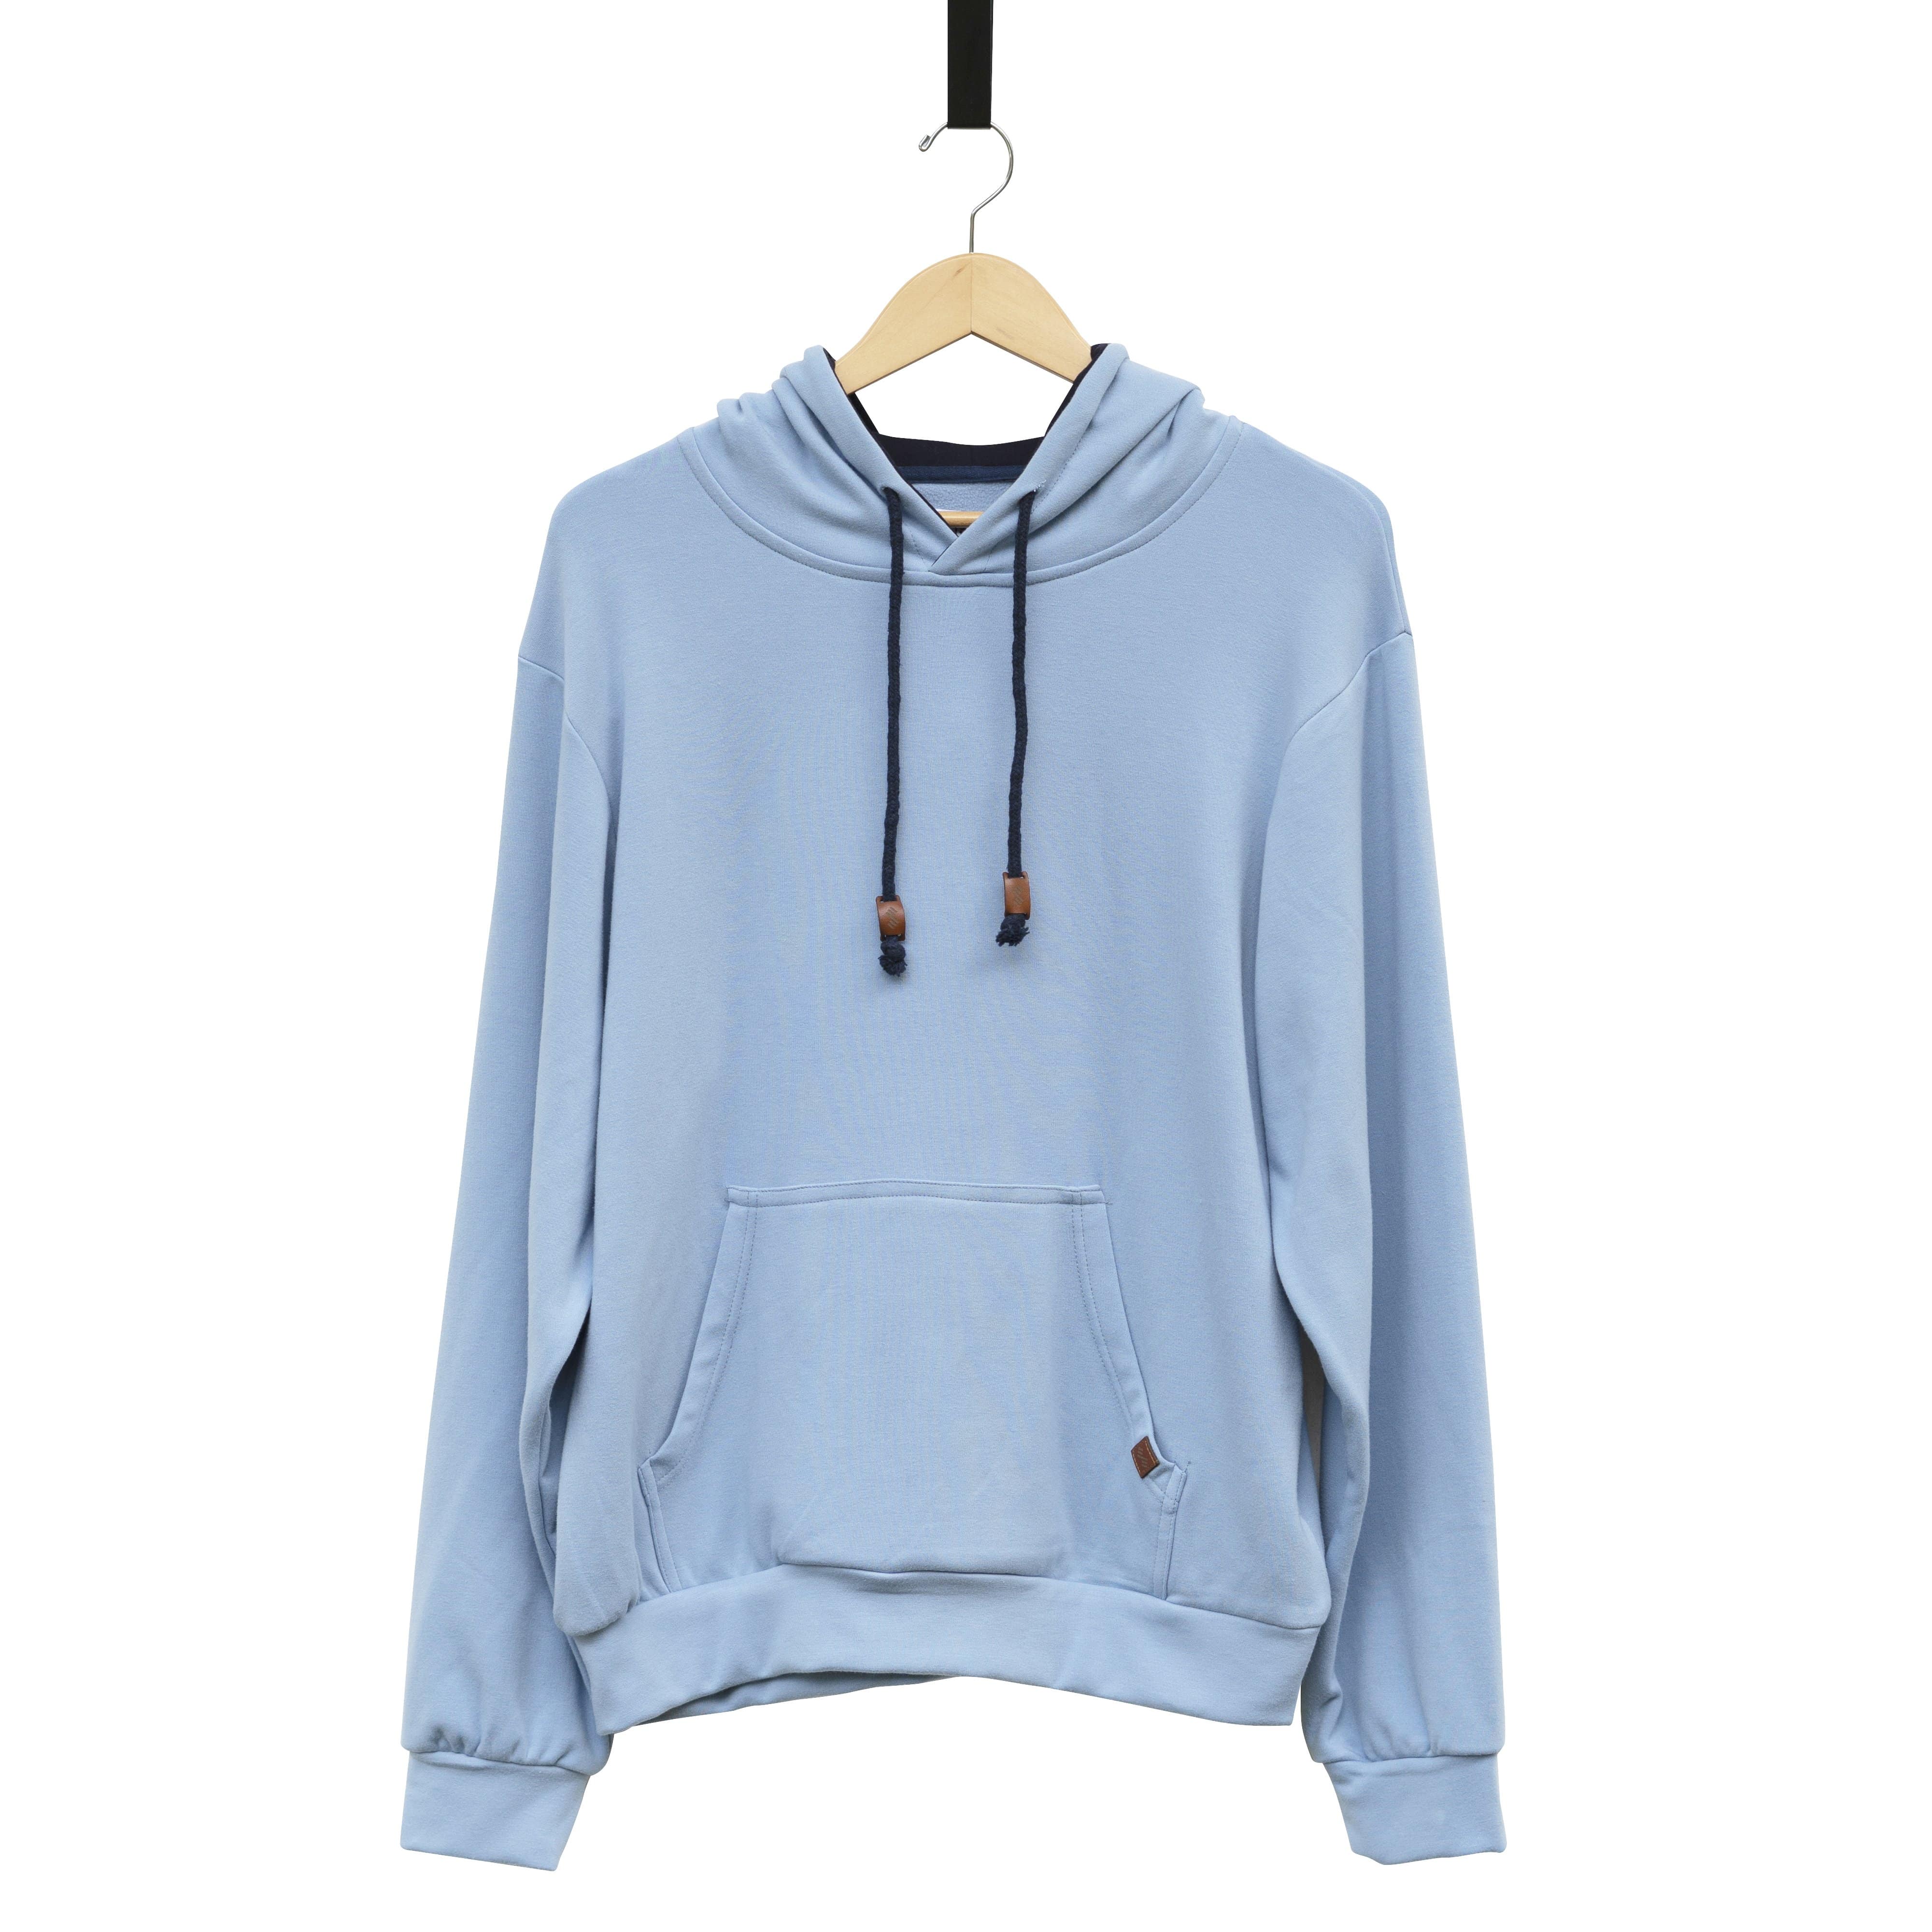 Sky Blue Cloud Blend Hoodie From SLYK - Front Angle